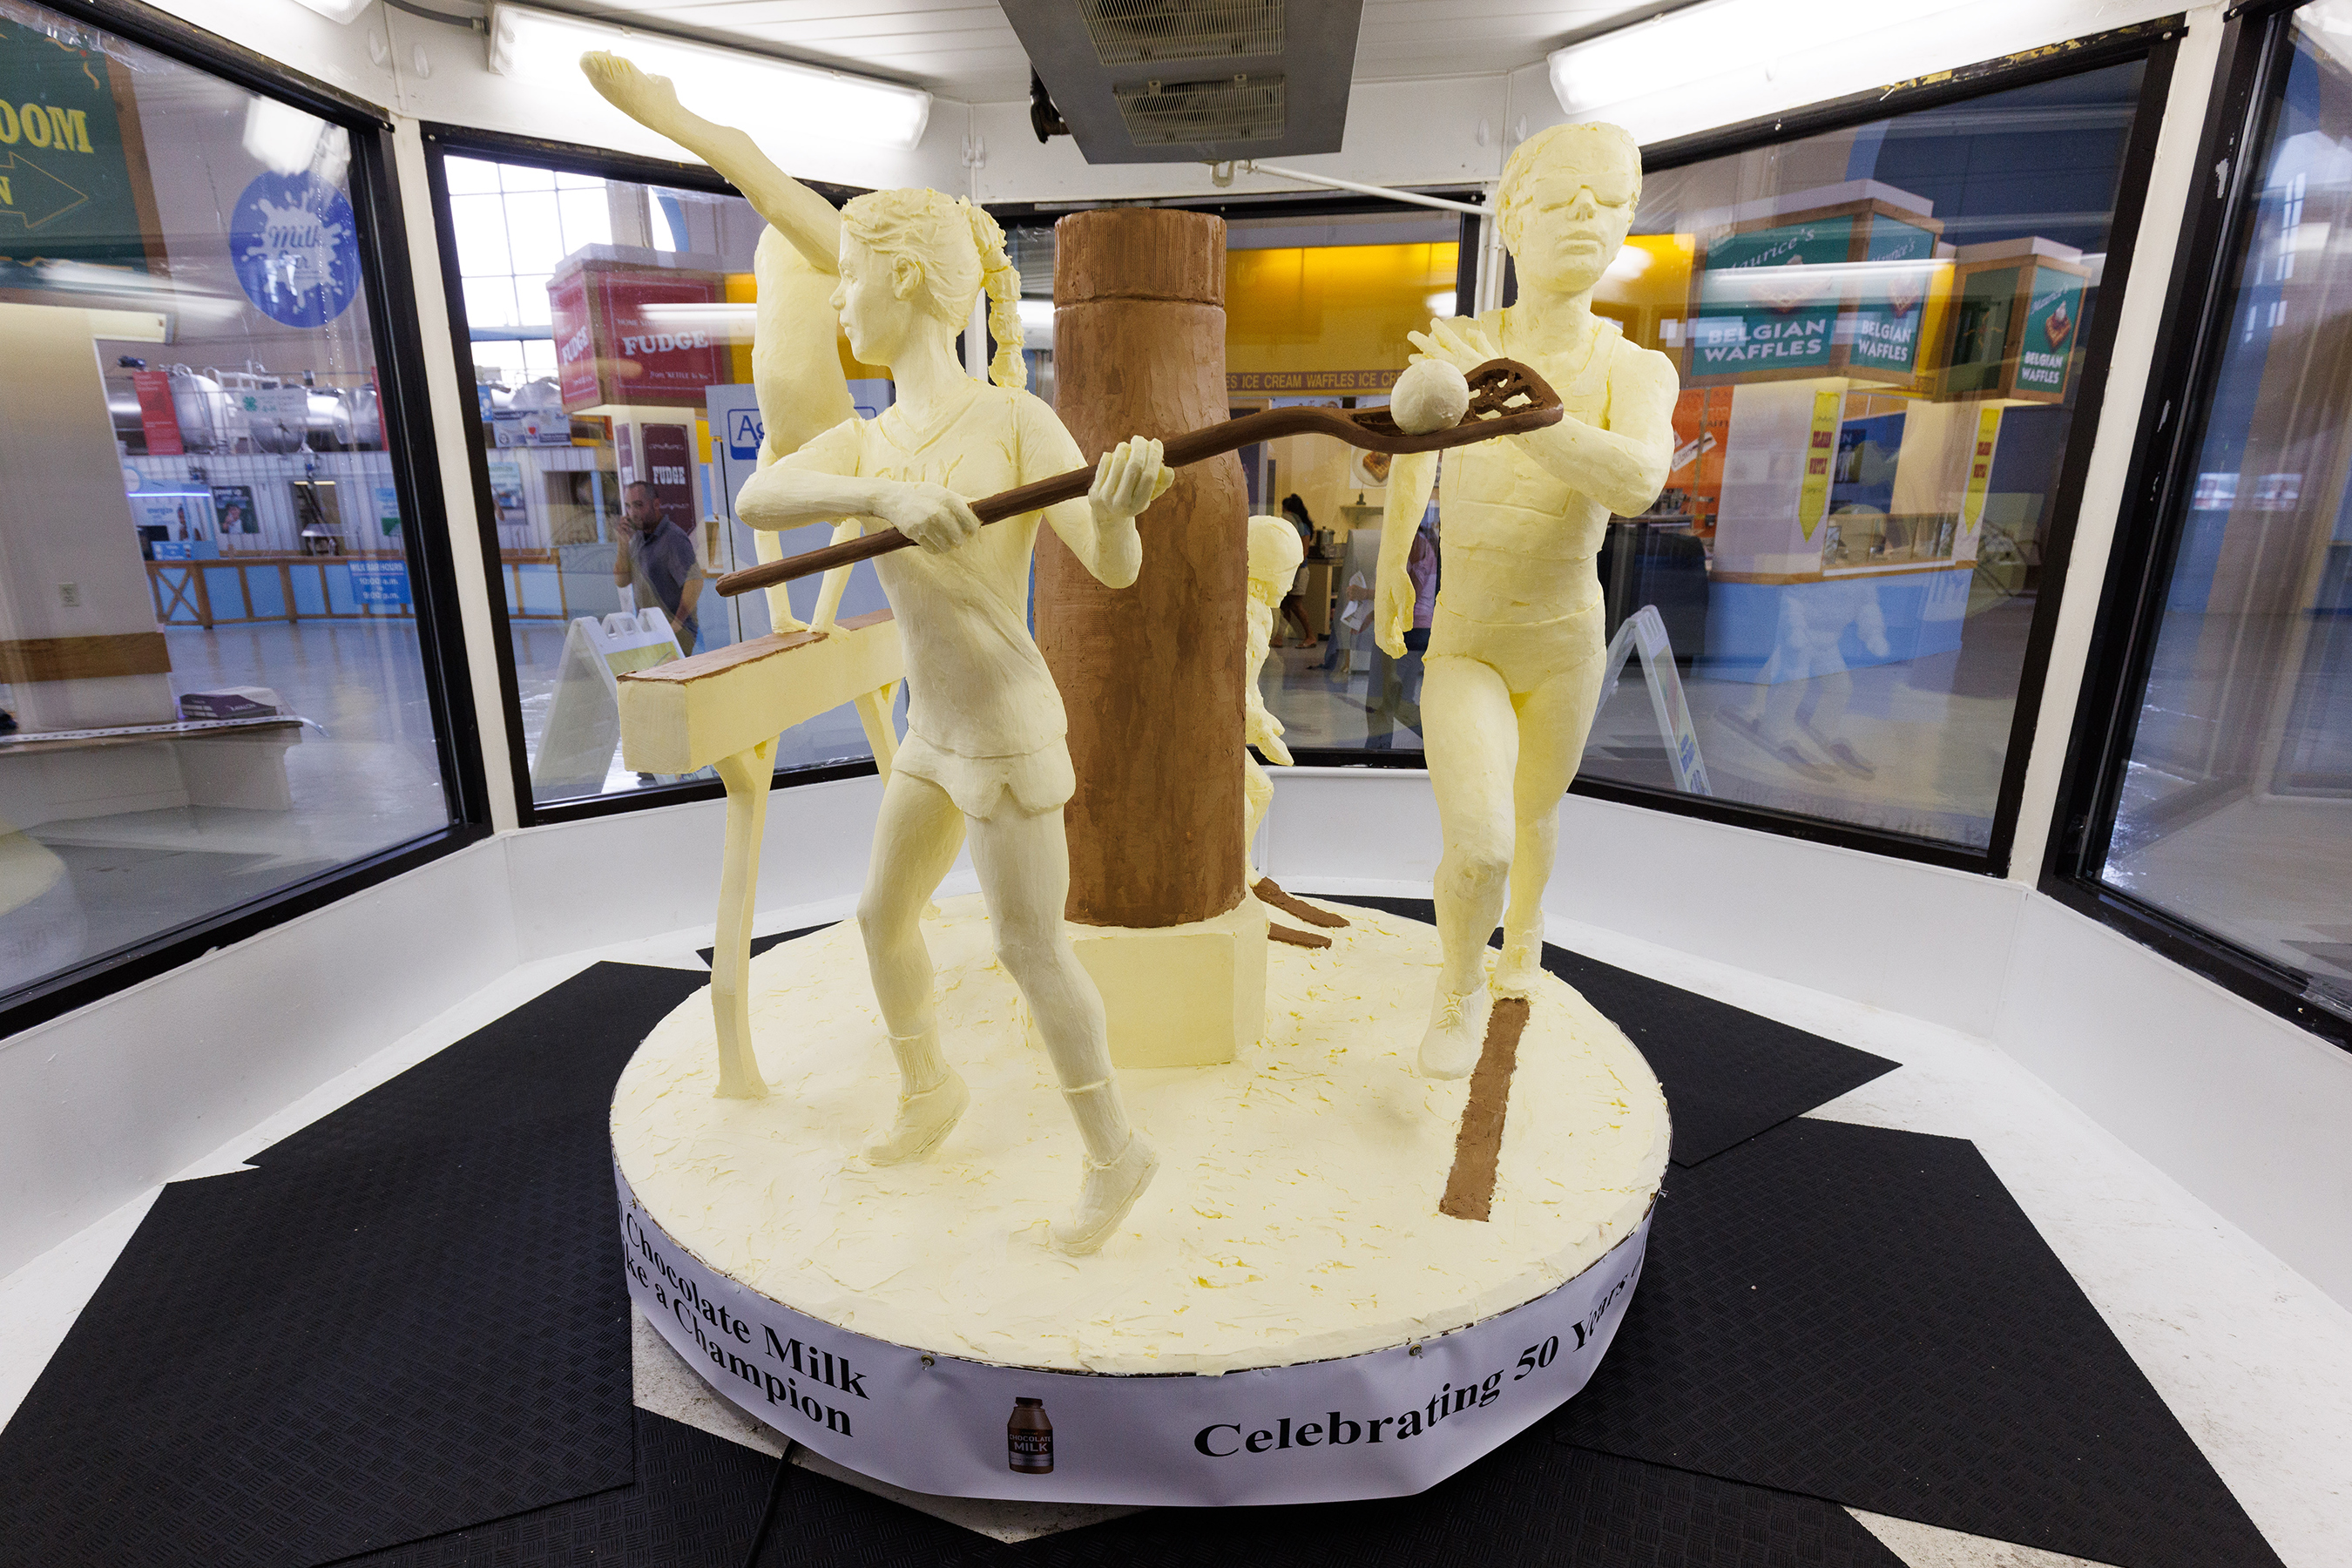 American Dairy Association North East unveiled the 54th Annual Butter Sculpture at the New York State Fair on August 23, 2022, titled Refuel Her Greatness – Celebrating the 50th Anniversary of Title IX. The sculpture spotlights female athletes and how today’s athletes refuel with chocolate milk and features a progression of female athletes ranging in age from a child skier to a high school-aged gymnast to a college lacrosse player to an adult runner.